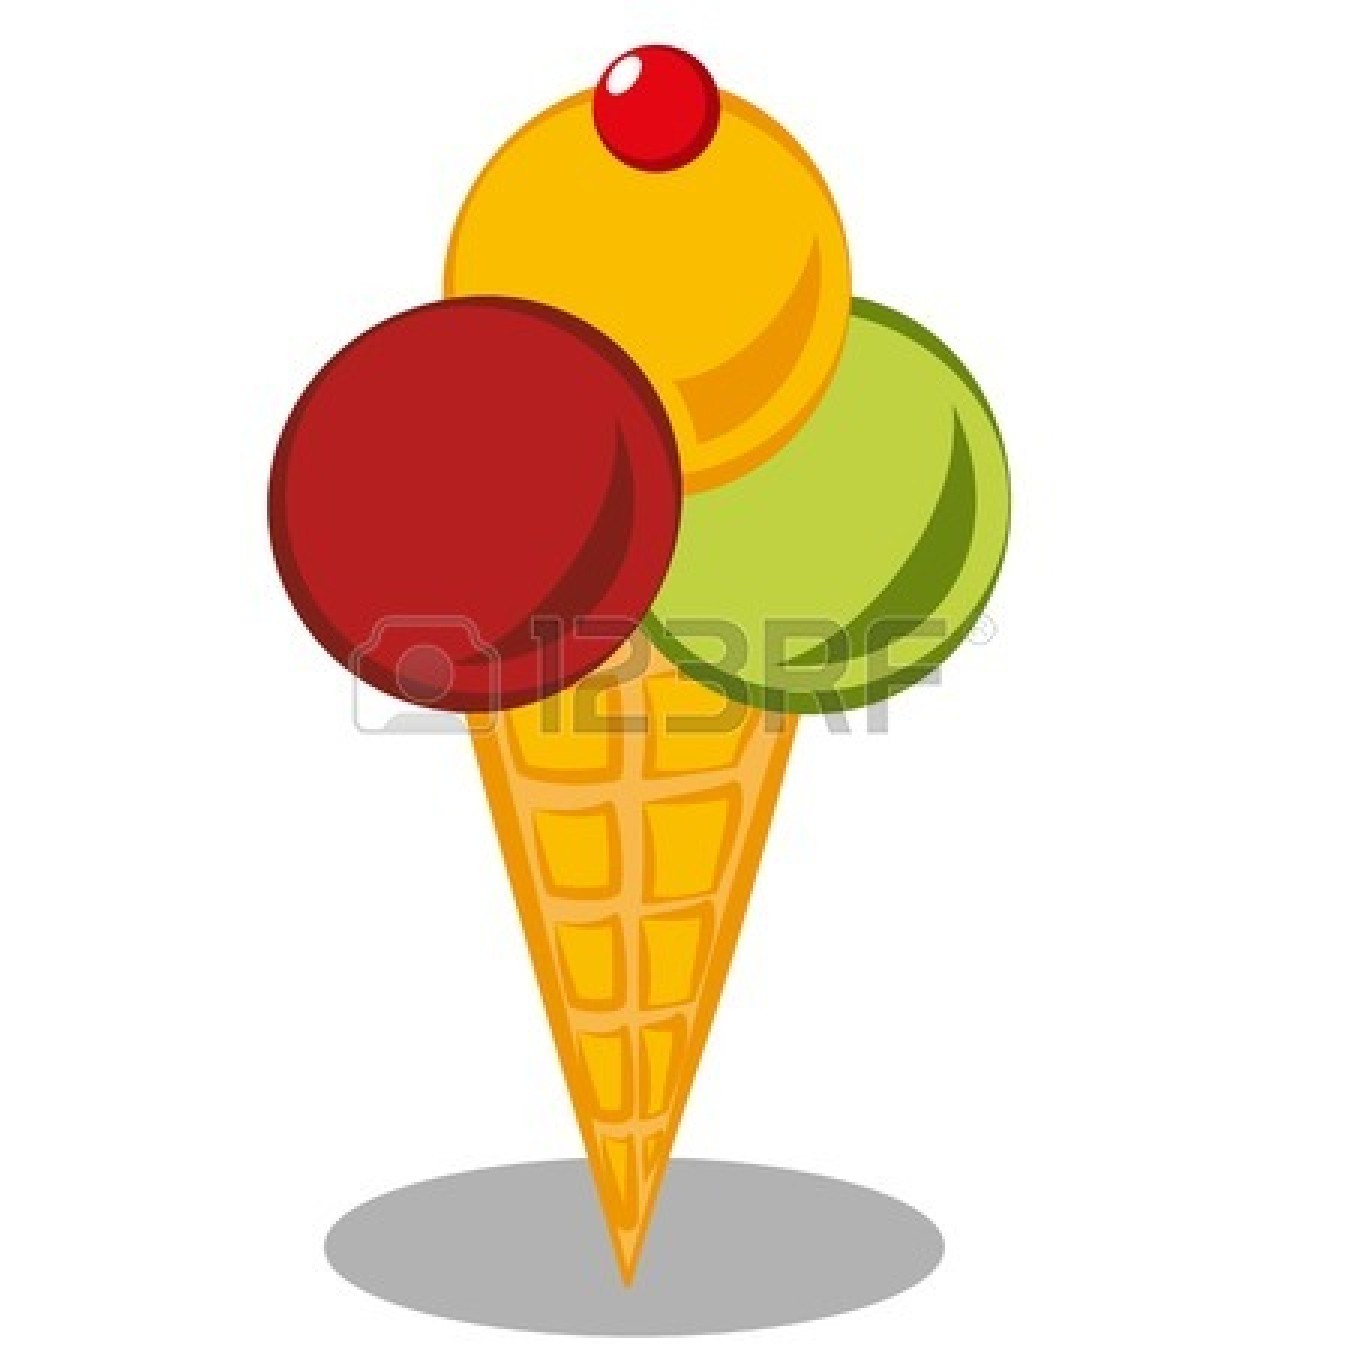 Ice Cream Cone With Sprinkles Clipart   Clipart Panda   Free Clipart